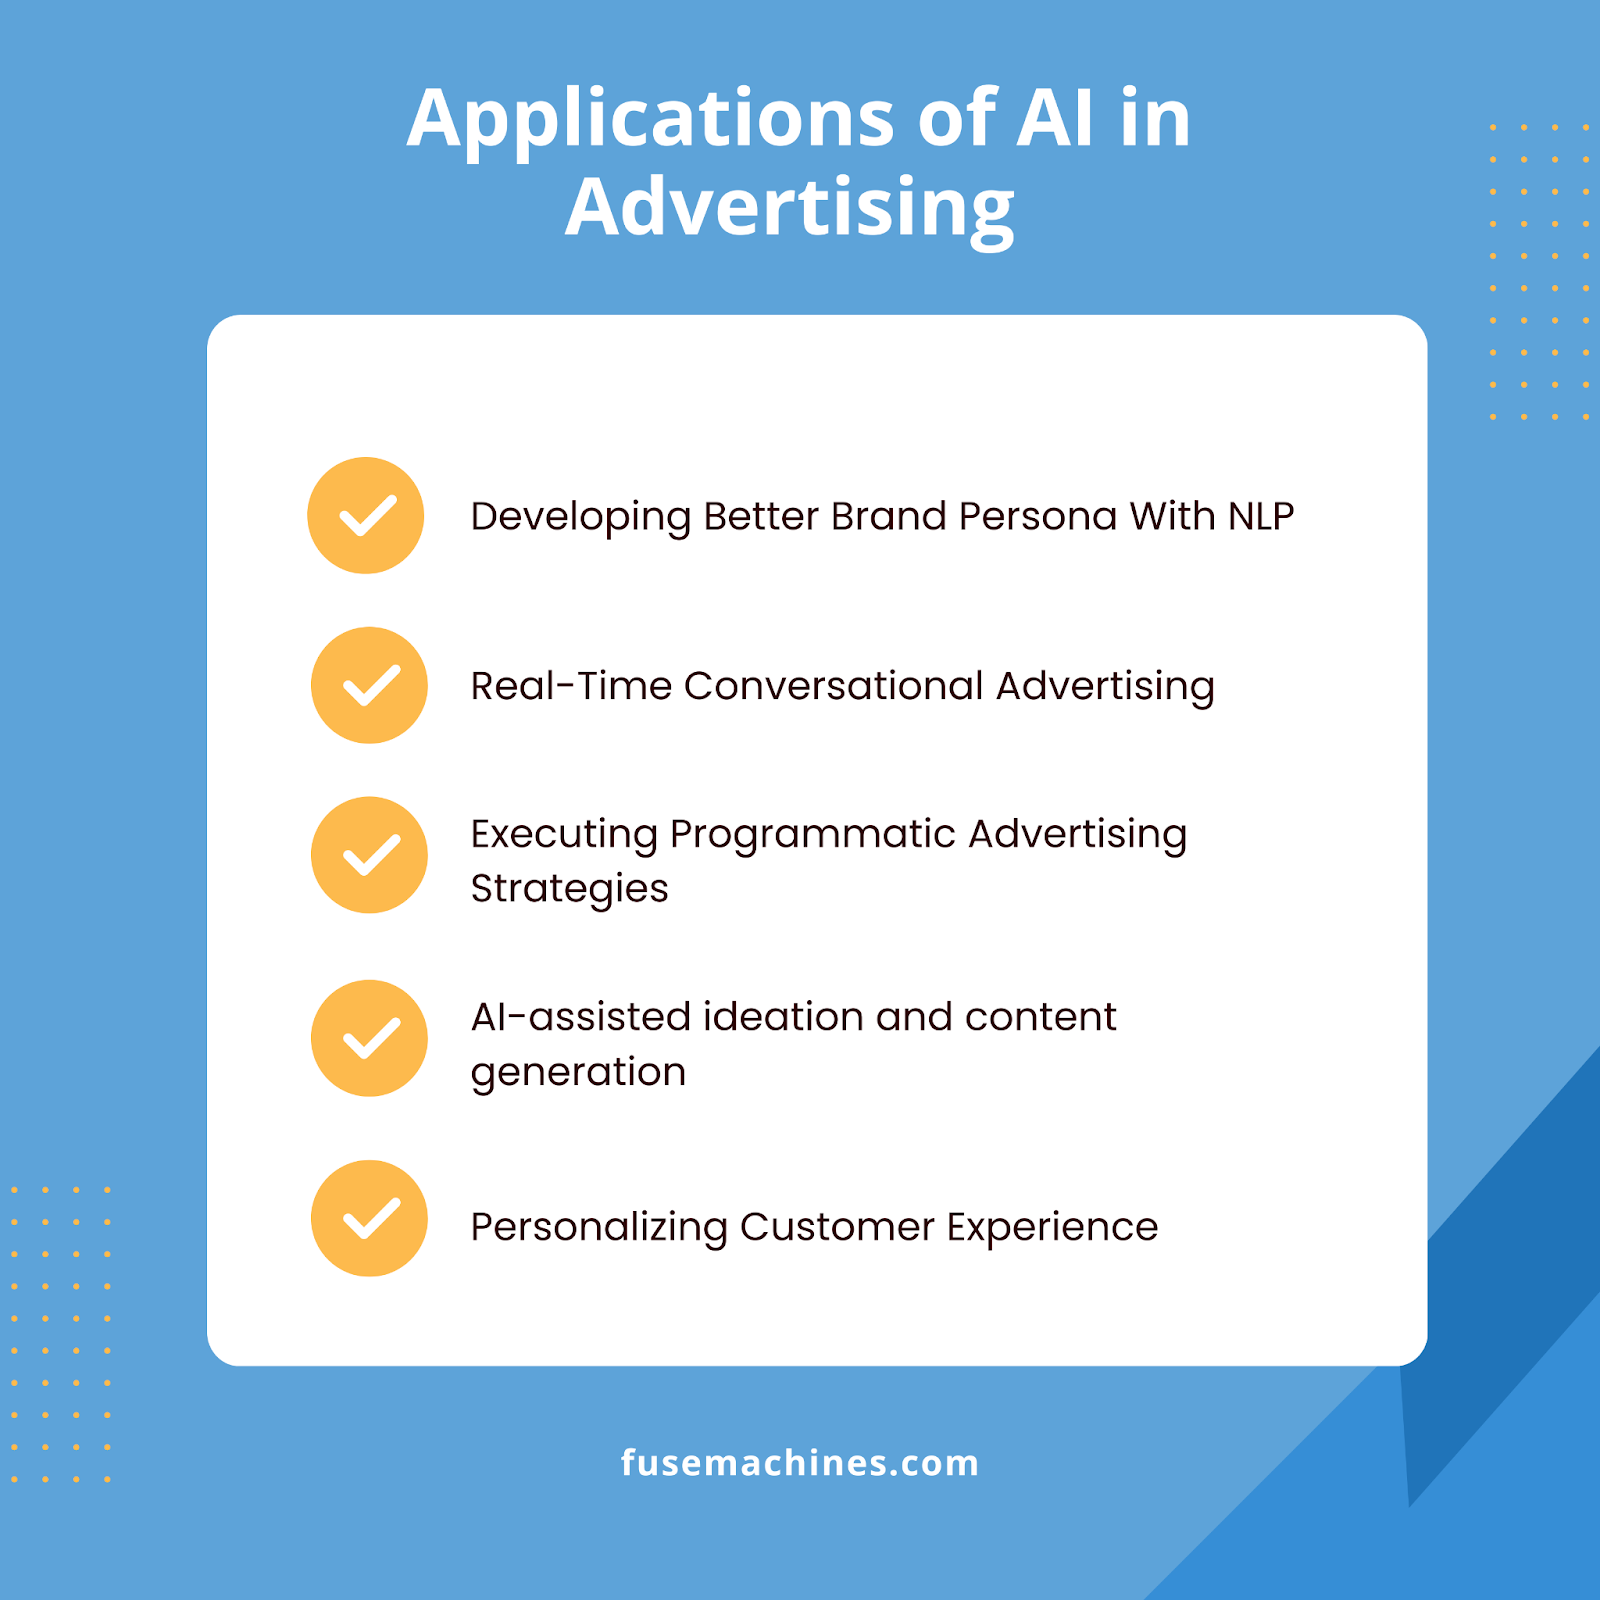 Common applications of AI in advertising